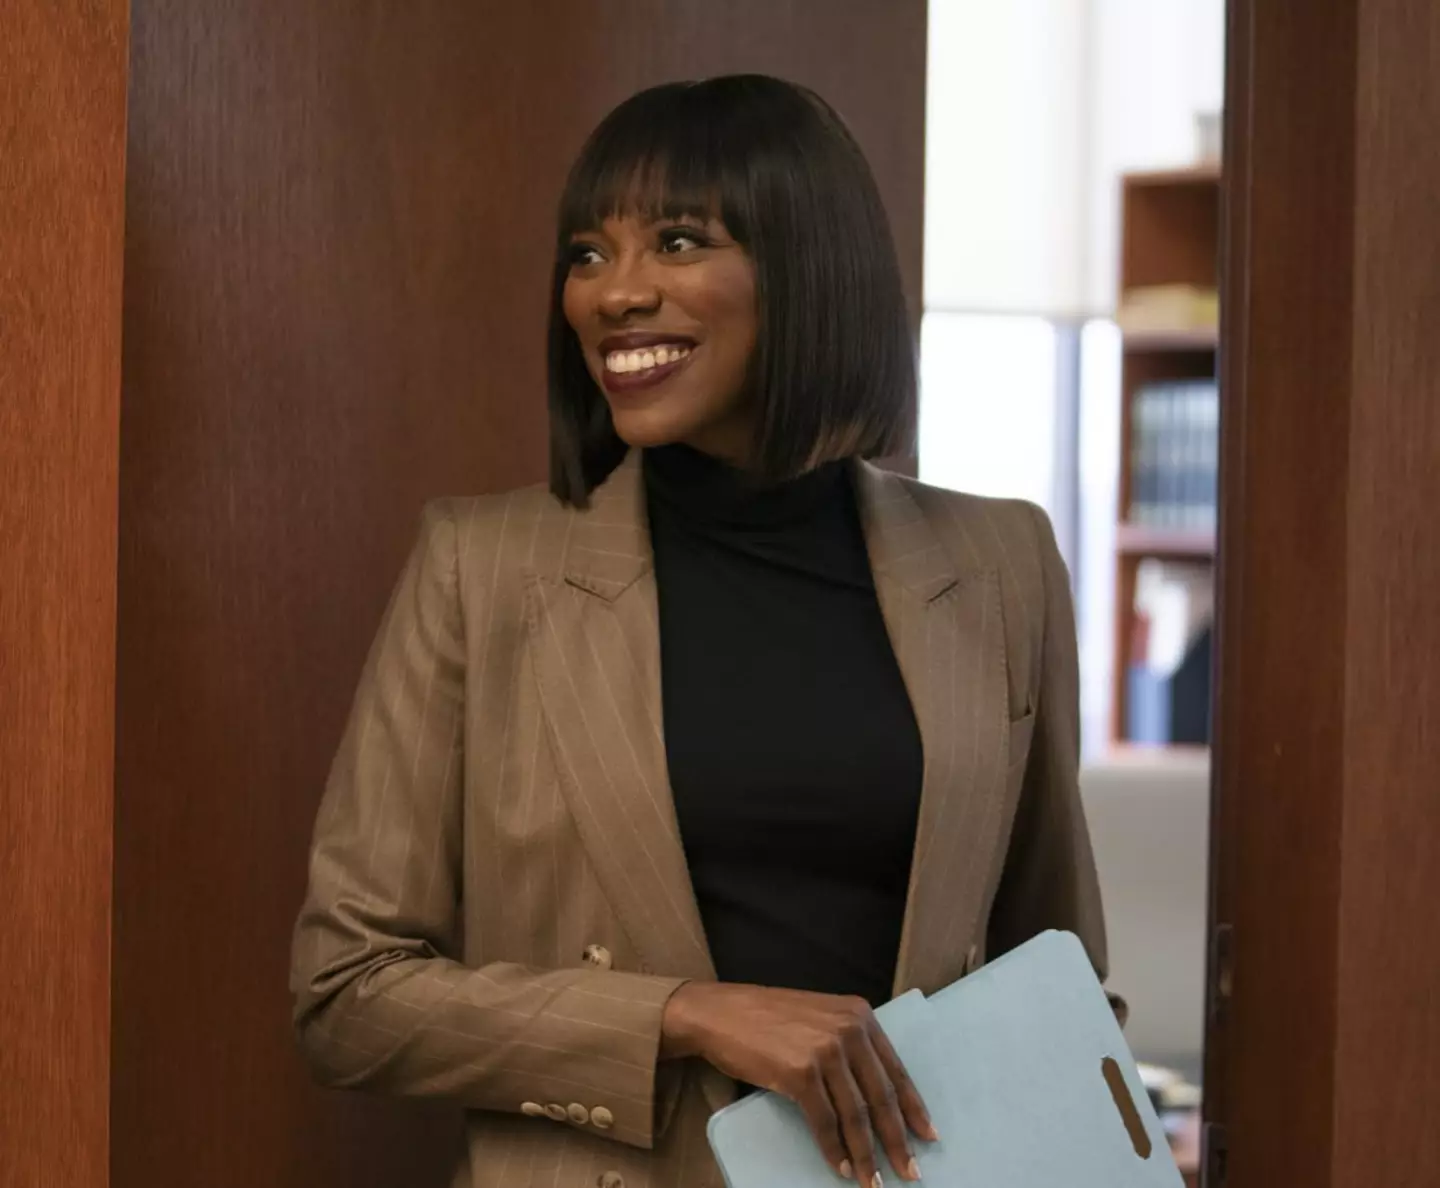 Yvonne Orji has revealed she's still a virgin at the age of 39.